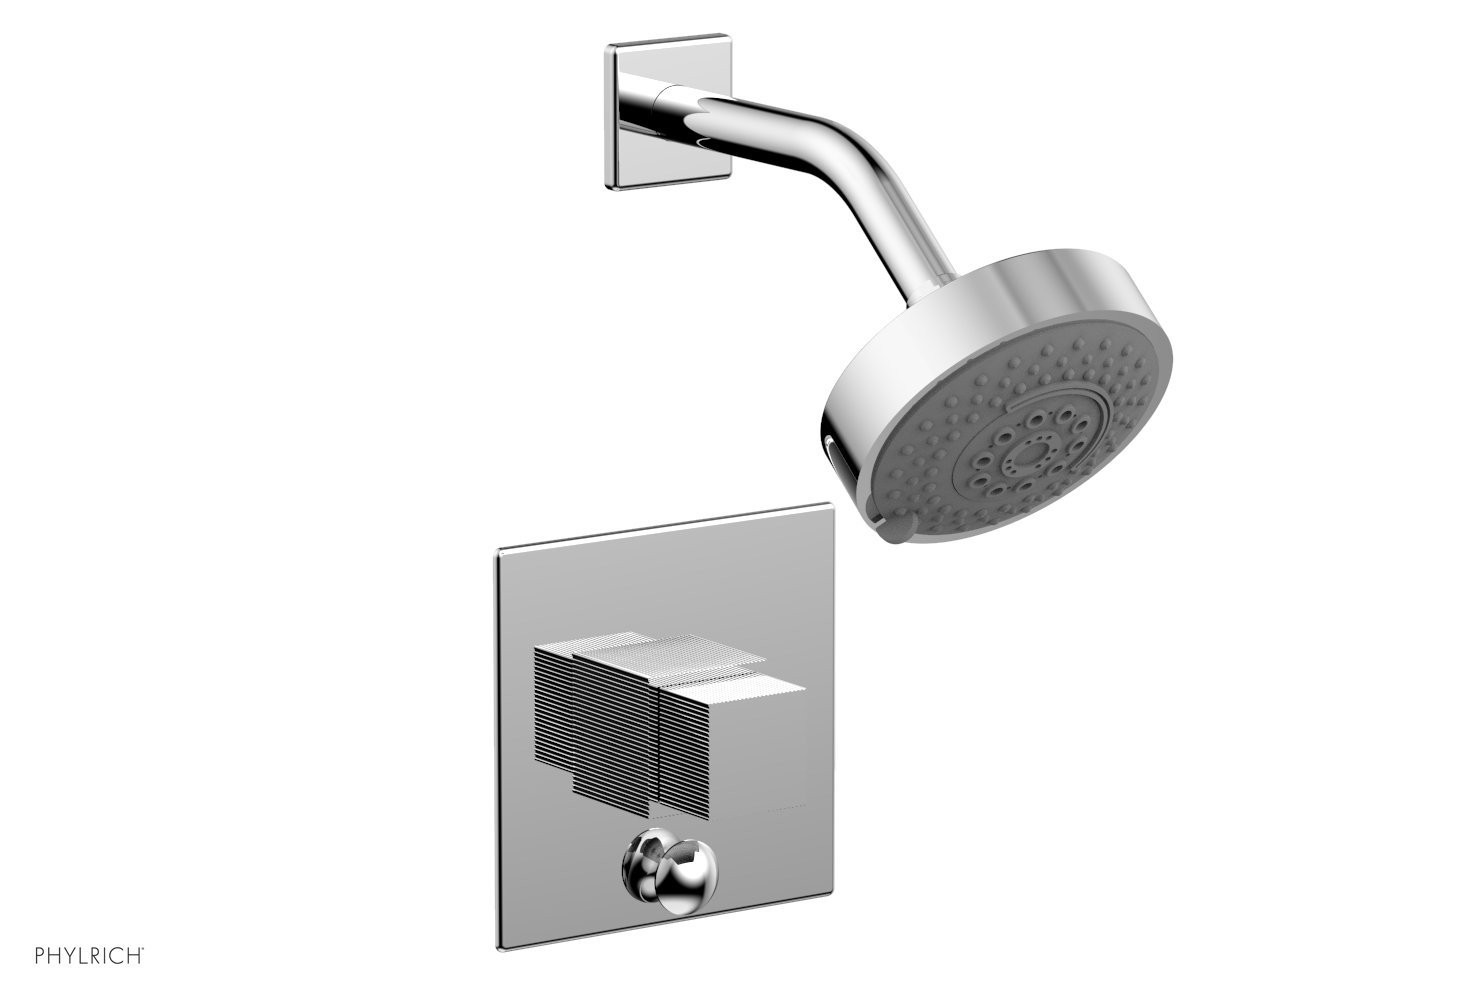 PHYLRICH 4-148 STRIA WALL MOUNT PRESSURE BALANCE SHOWER AND DIVERTER SET WITH CUBE HANDLE